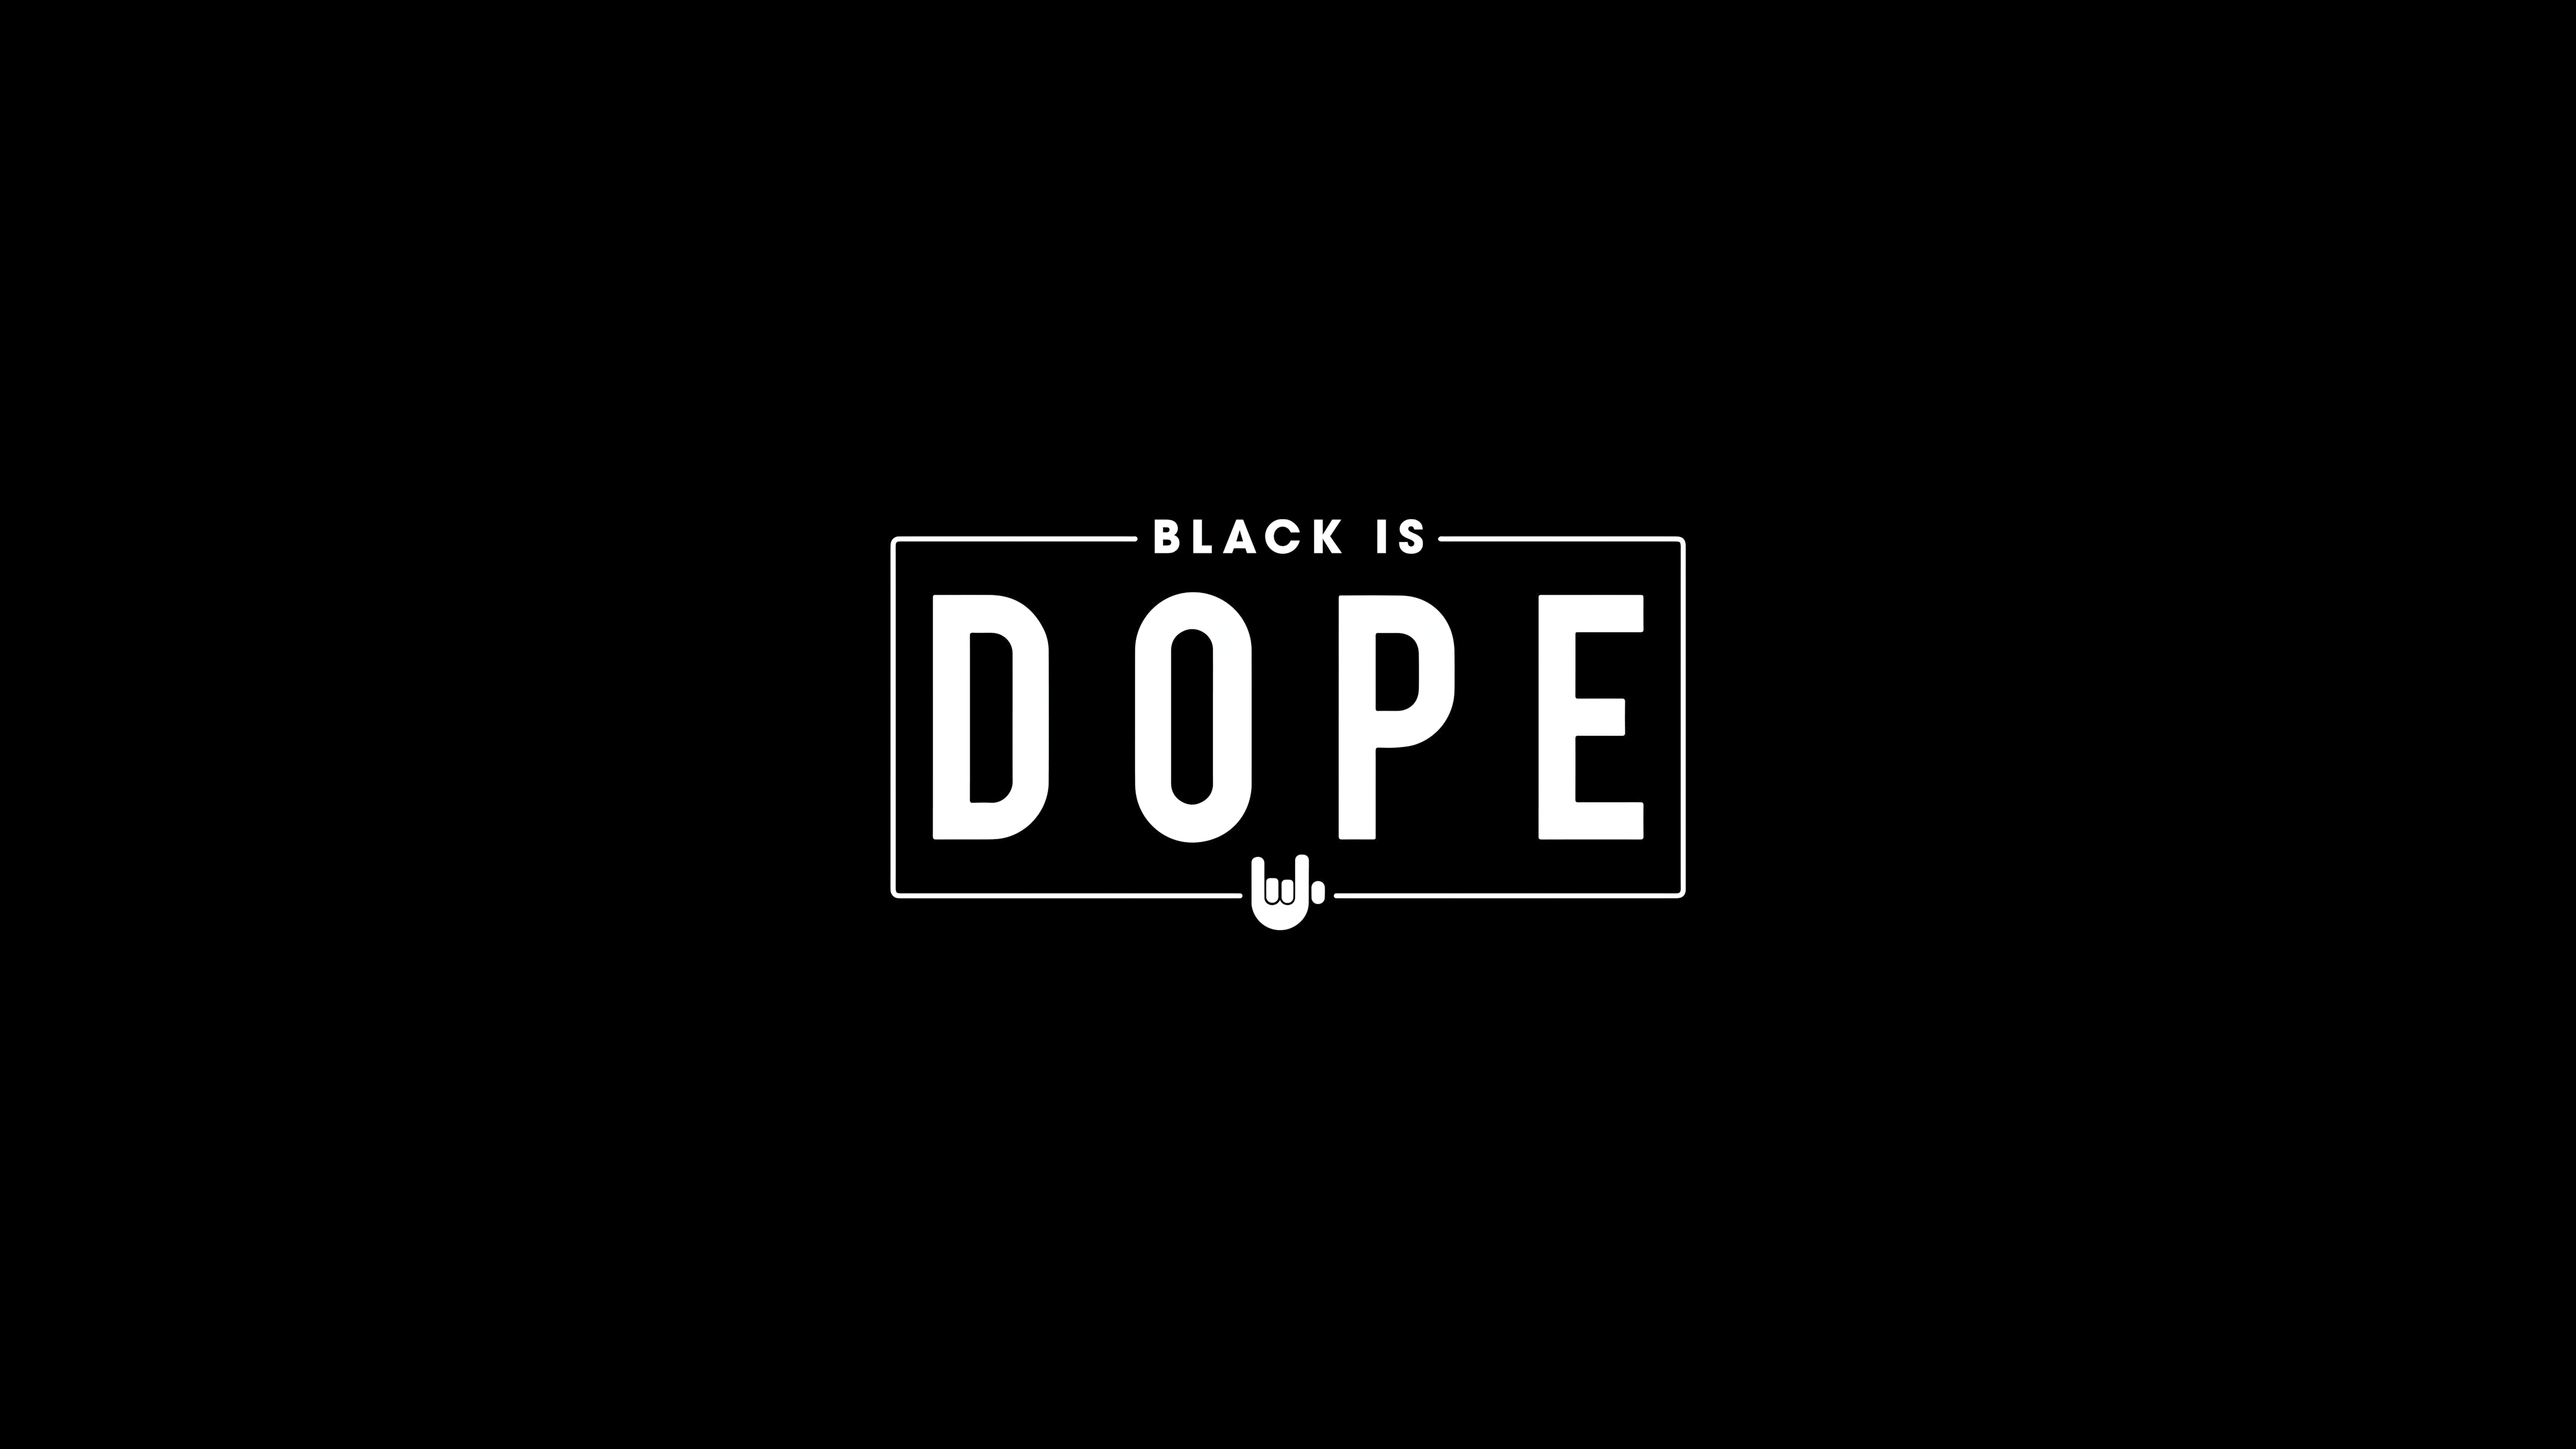 HD wallpaper, 5K, Black Background, Simple, Black Is Dope, Black Quotes